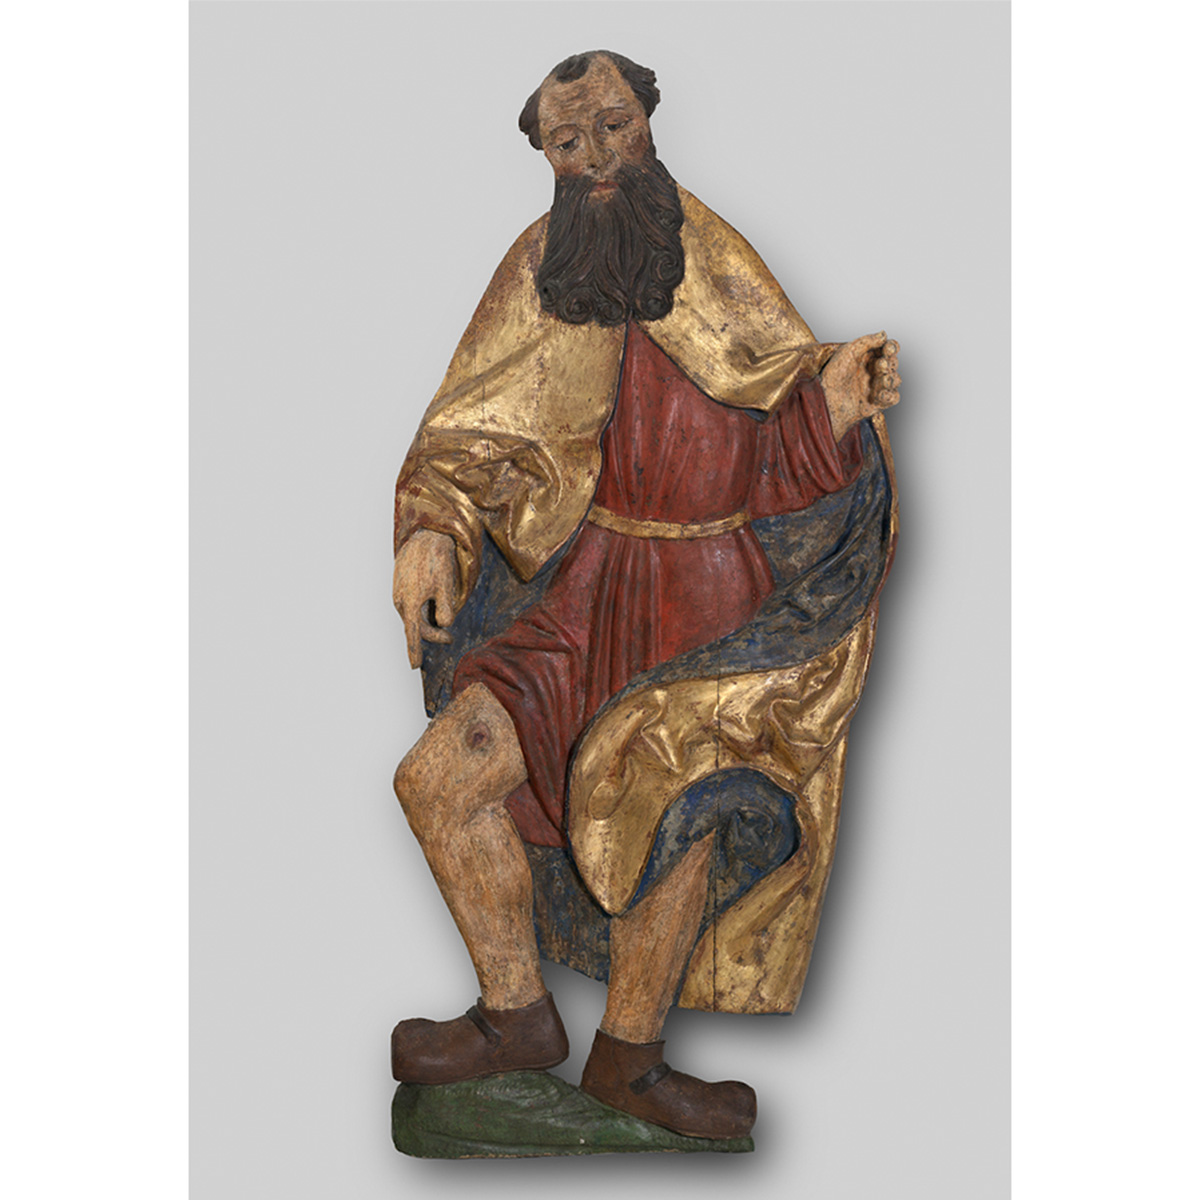 Brought to Life: Painted Wood Sculpture from Europe, 1300–1700